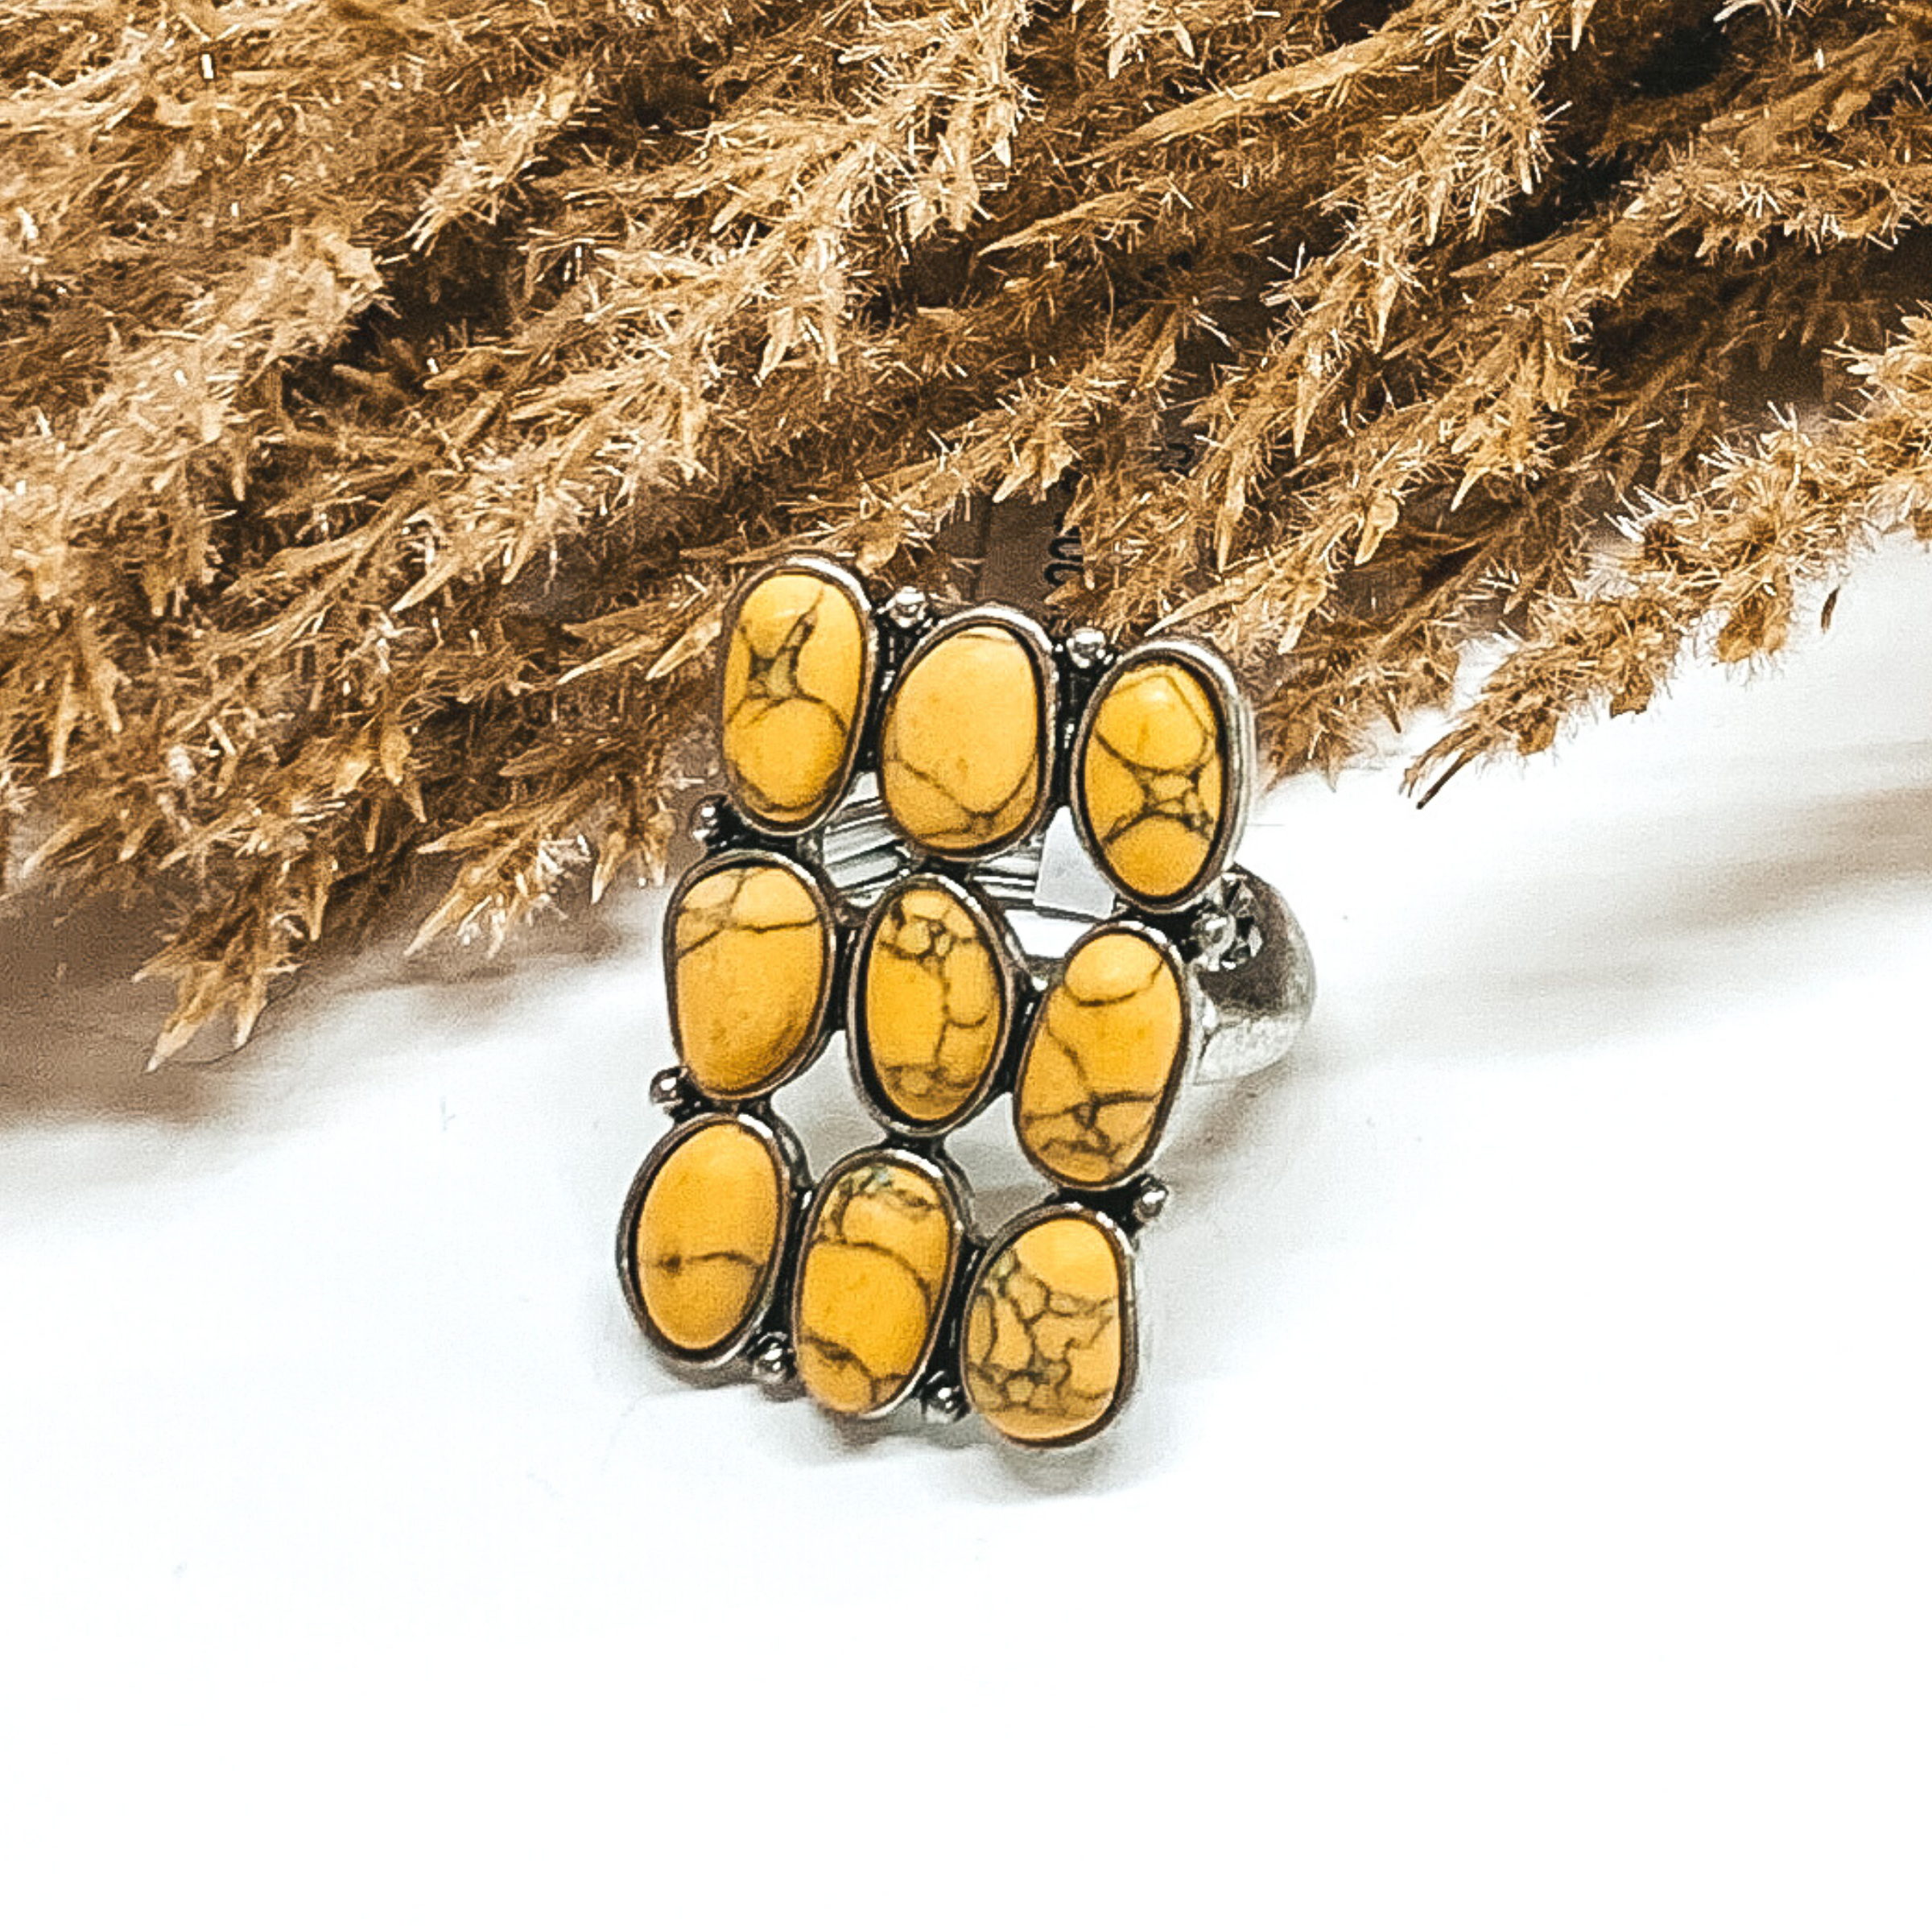 This is a silver ring with nine yellow stones in rows of three creating a rectangle shape. This ring is pictured on a white background with some tan floral in the background.